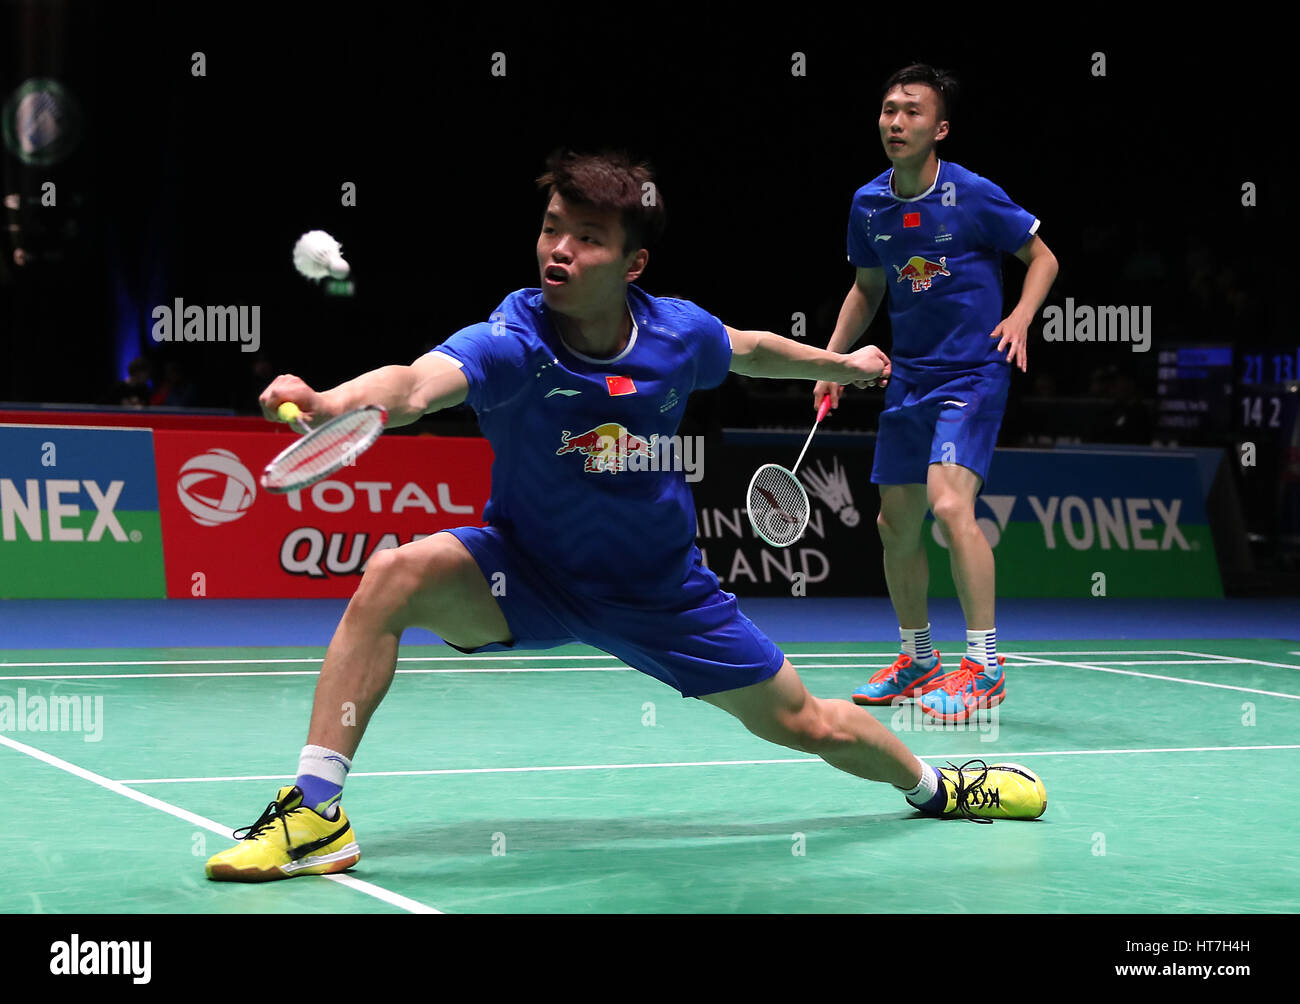 China's Wang Yilyu (left) and Huang Kaiiang in action during the Men's doubles match during day two of the YONEX All England Open Badminton Championships at the Barclaycard Arena, Birmingham. Stock Photo